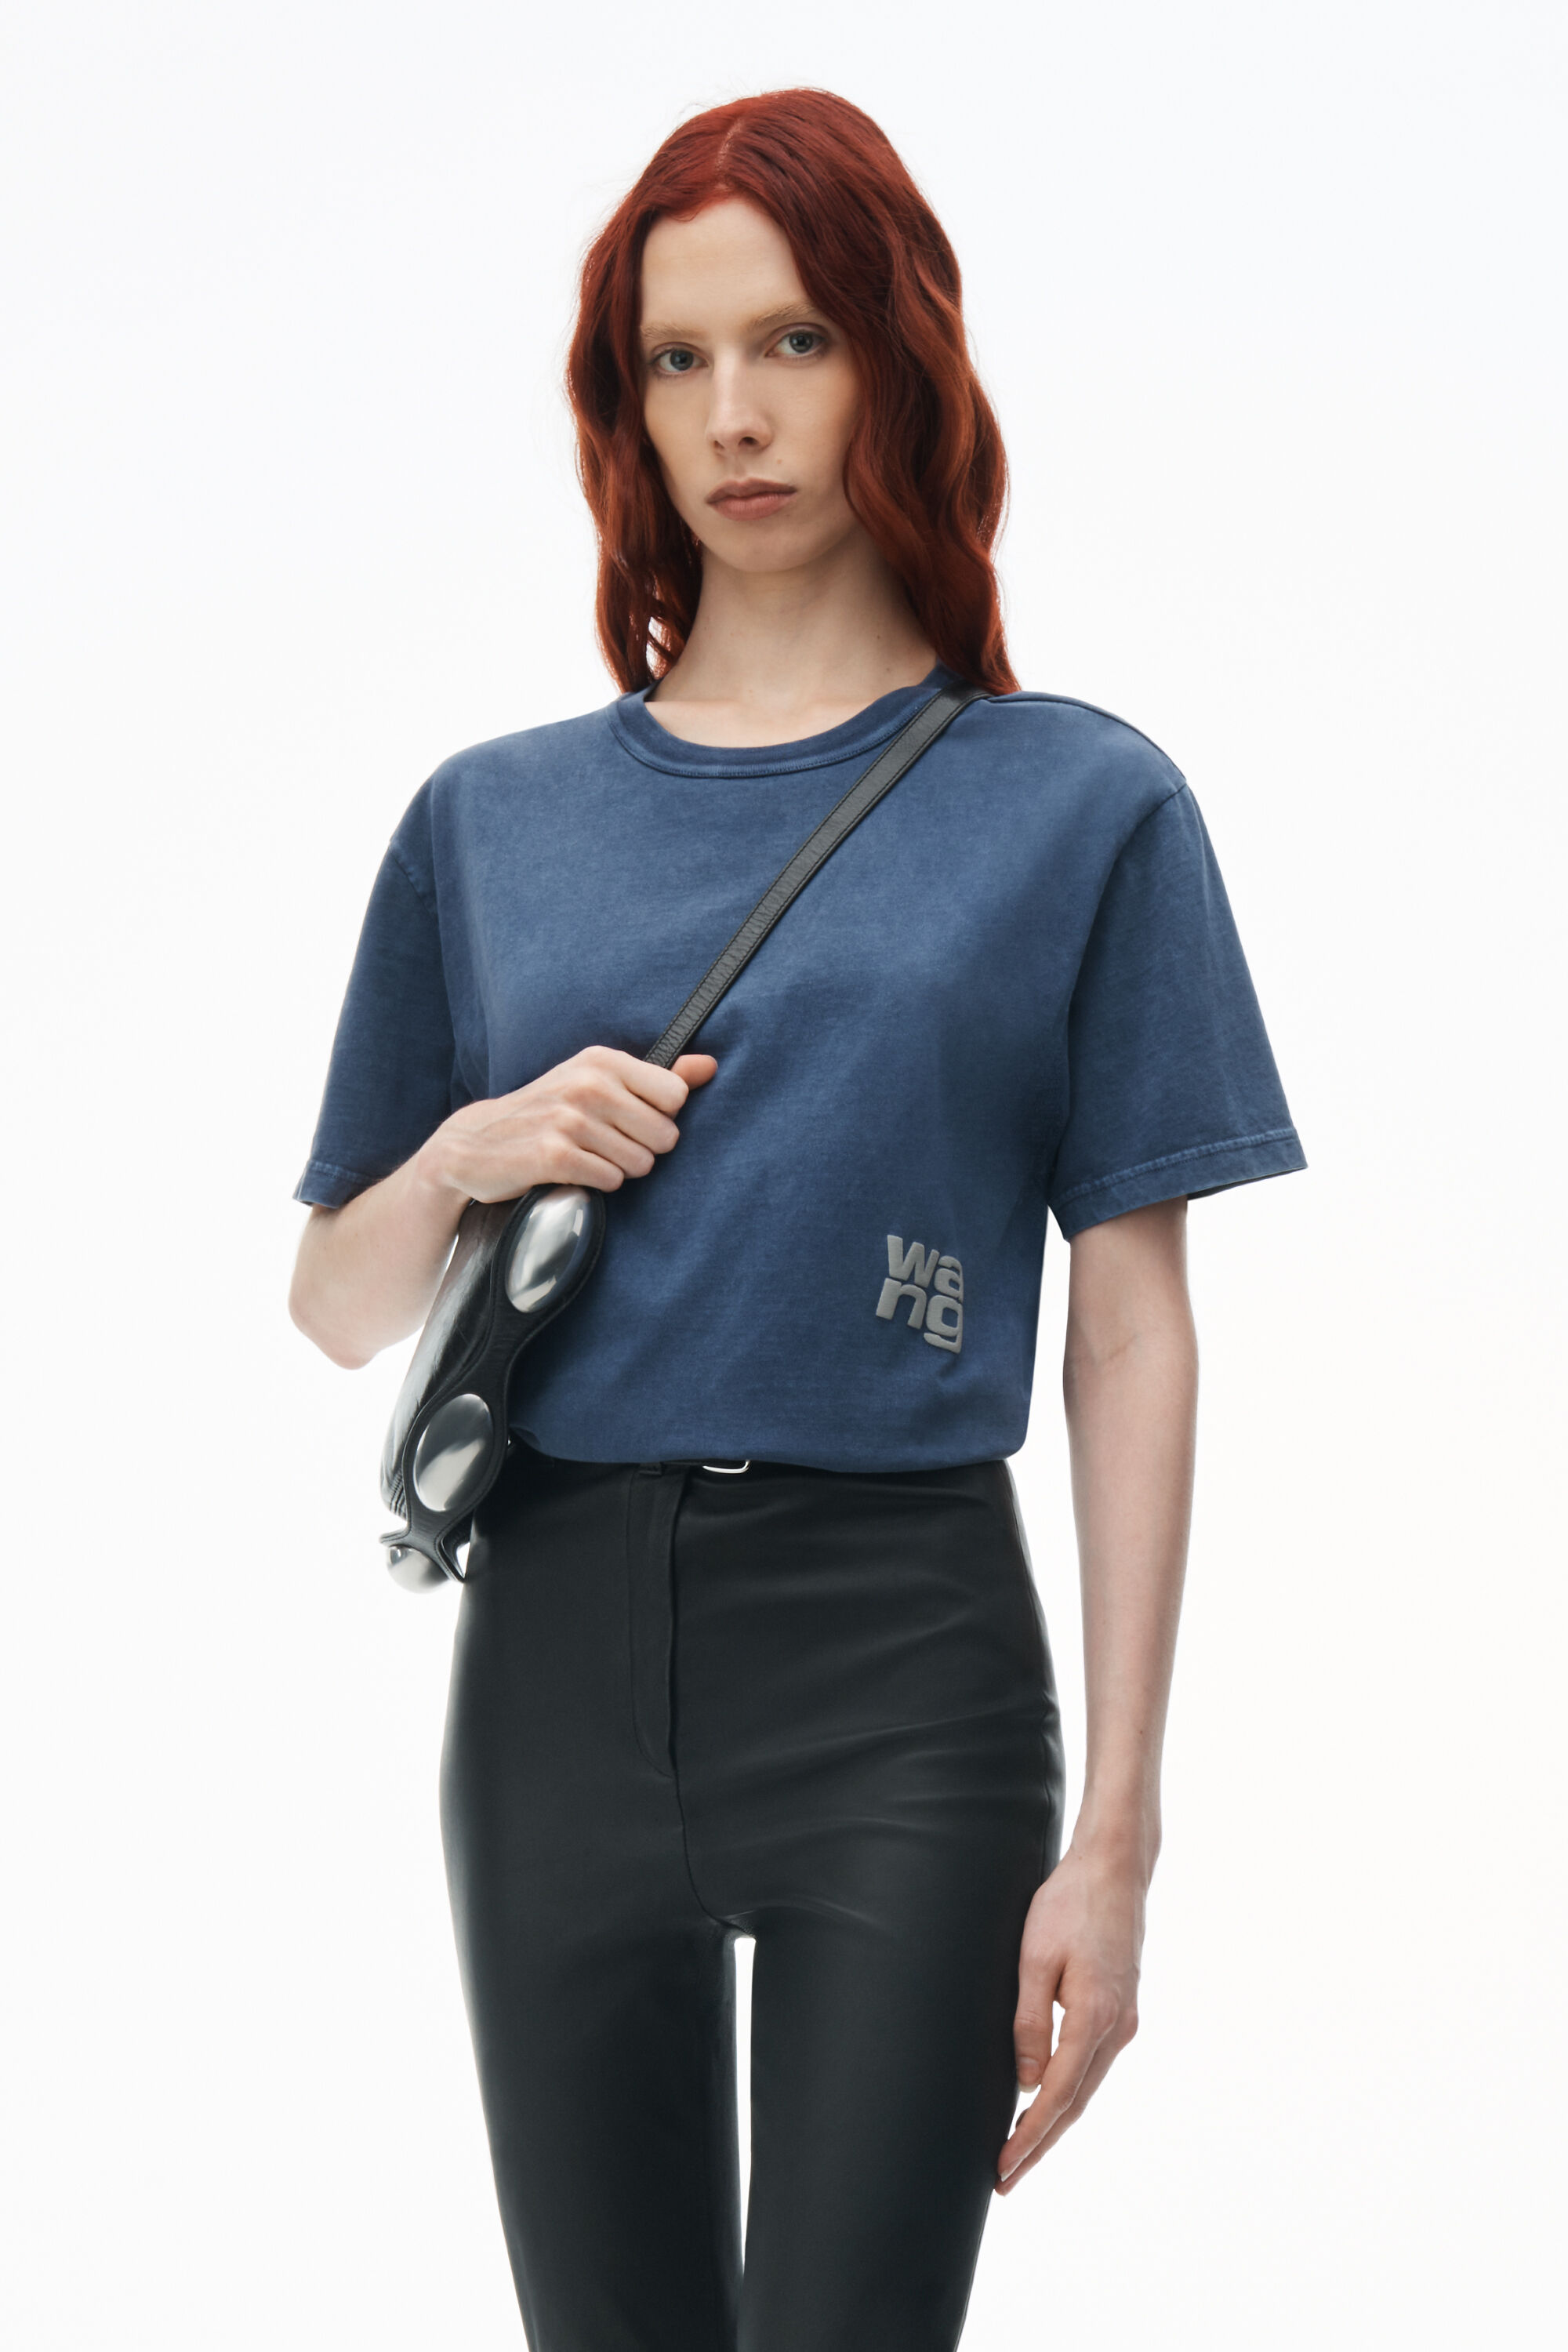 puff logo tee in essential cotton jersey in MARITIME BLUE 